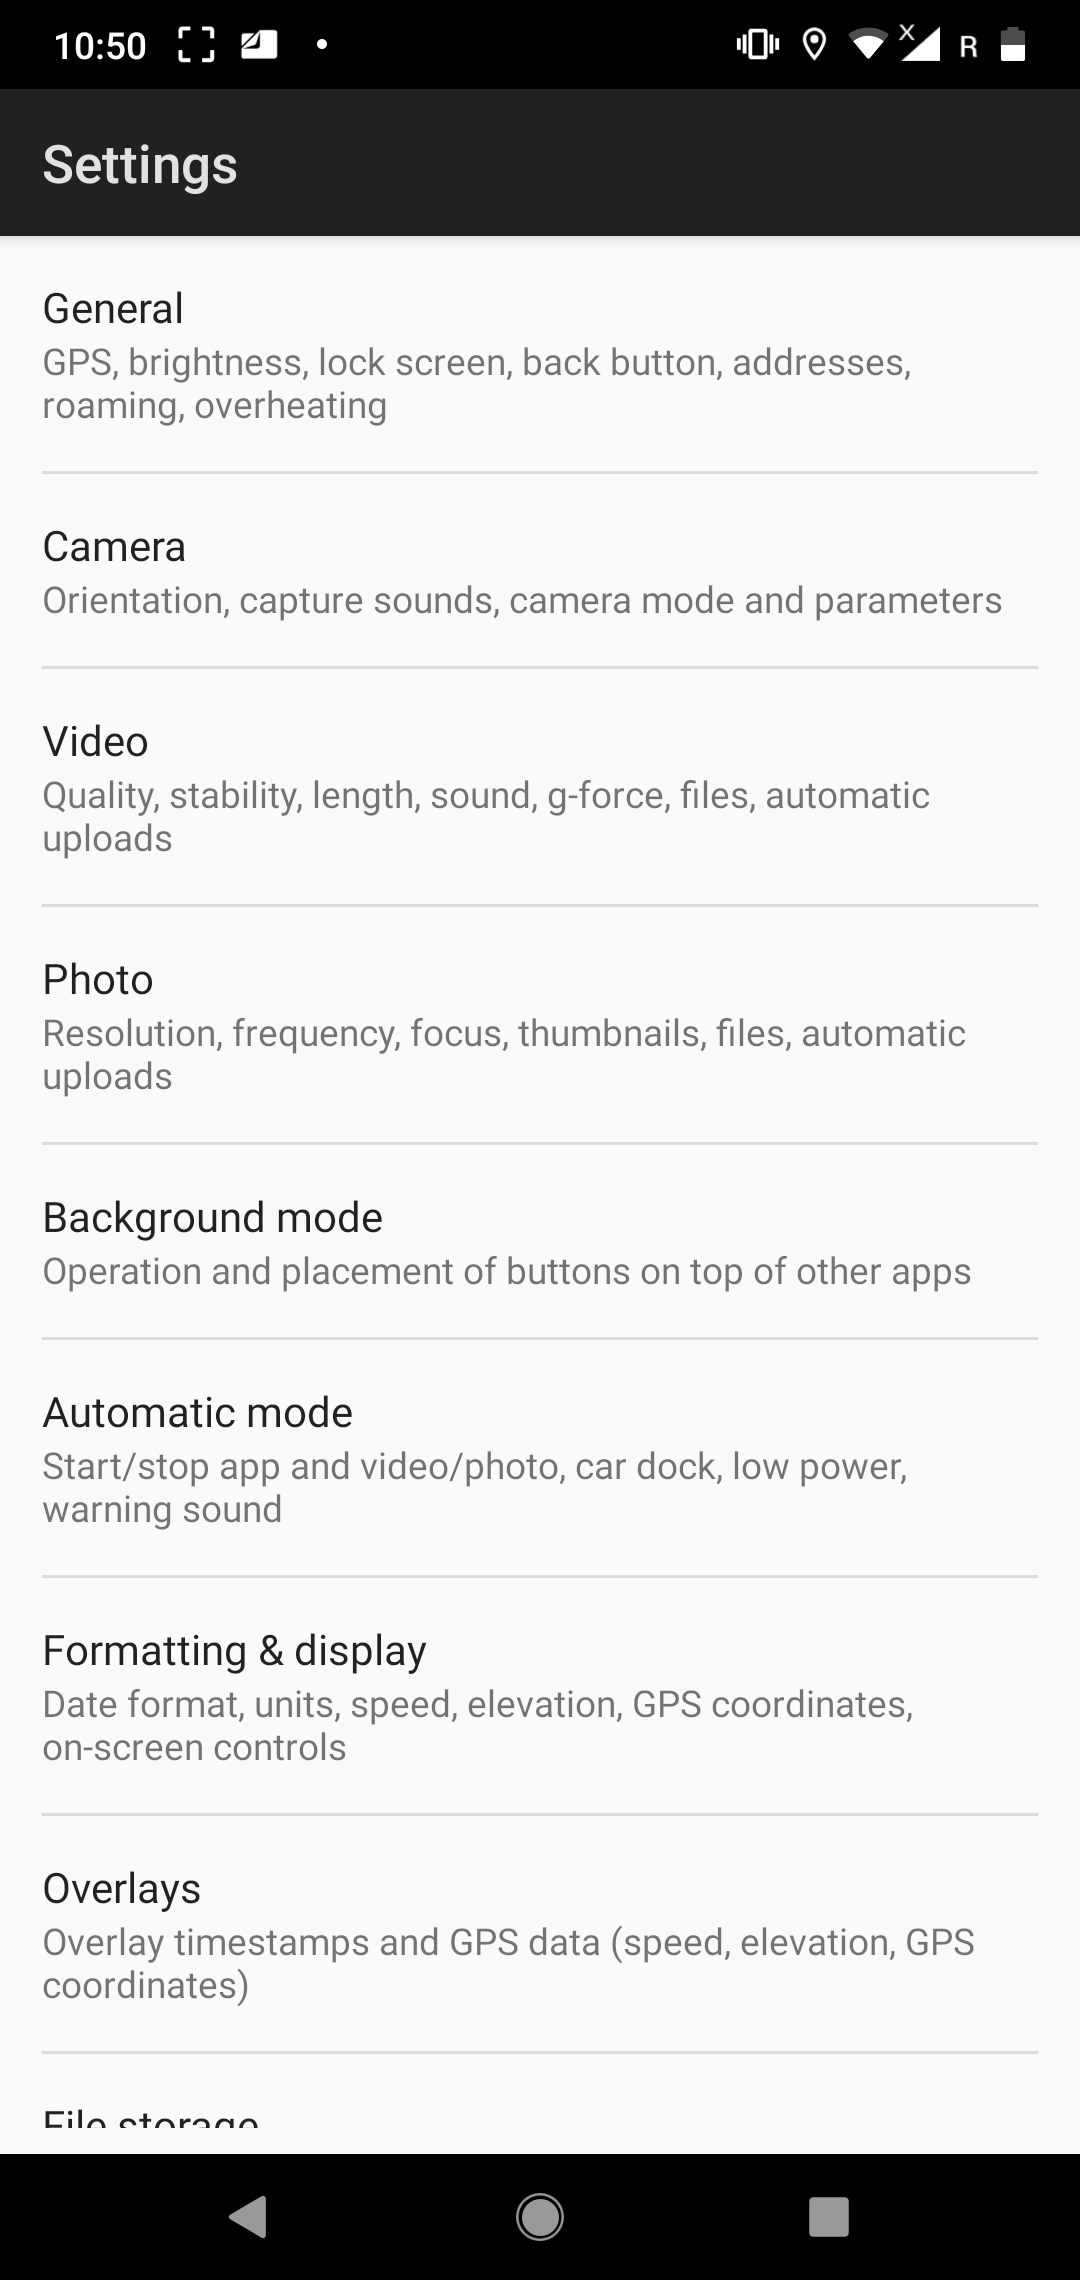 Settings for power users